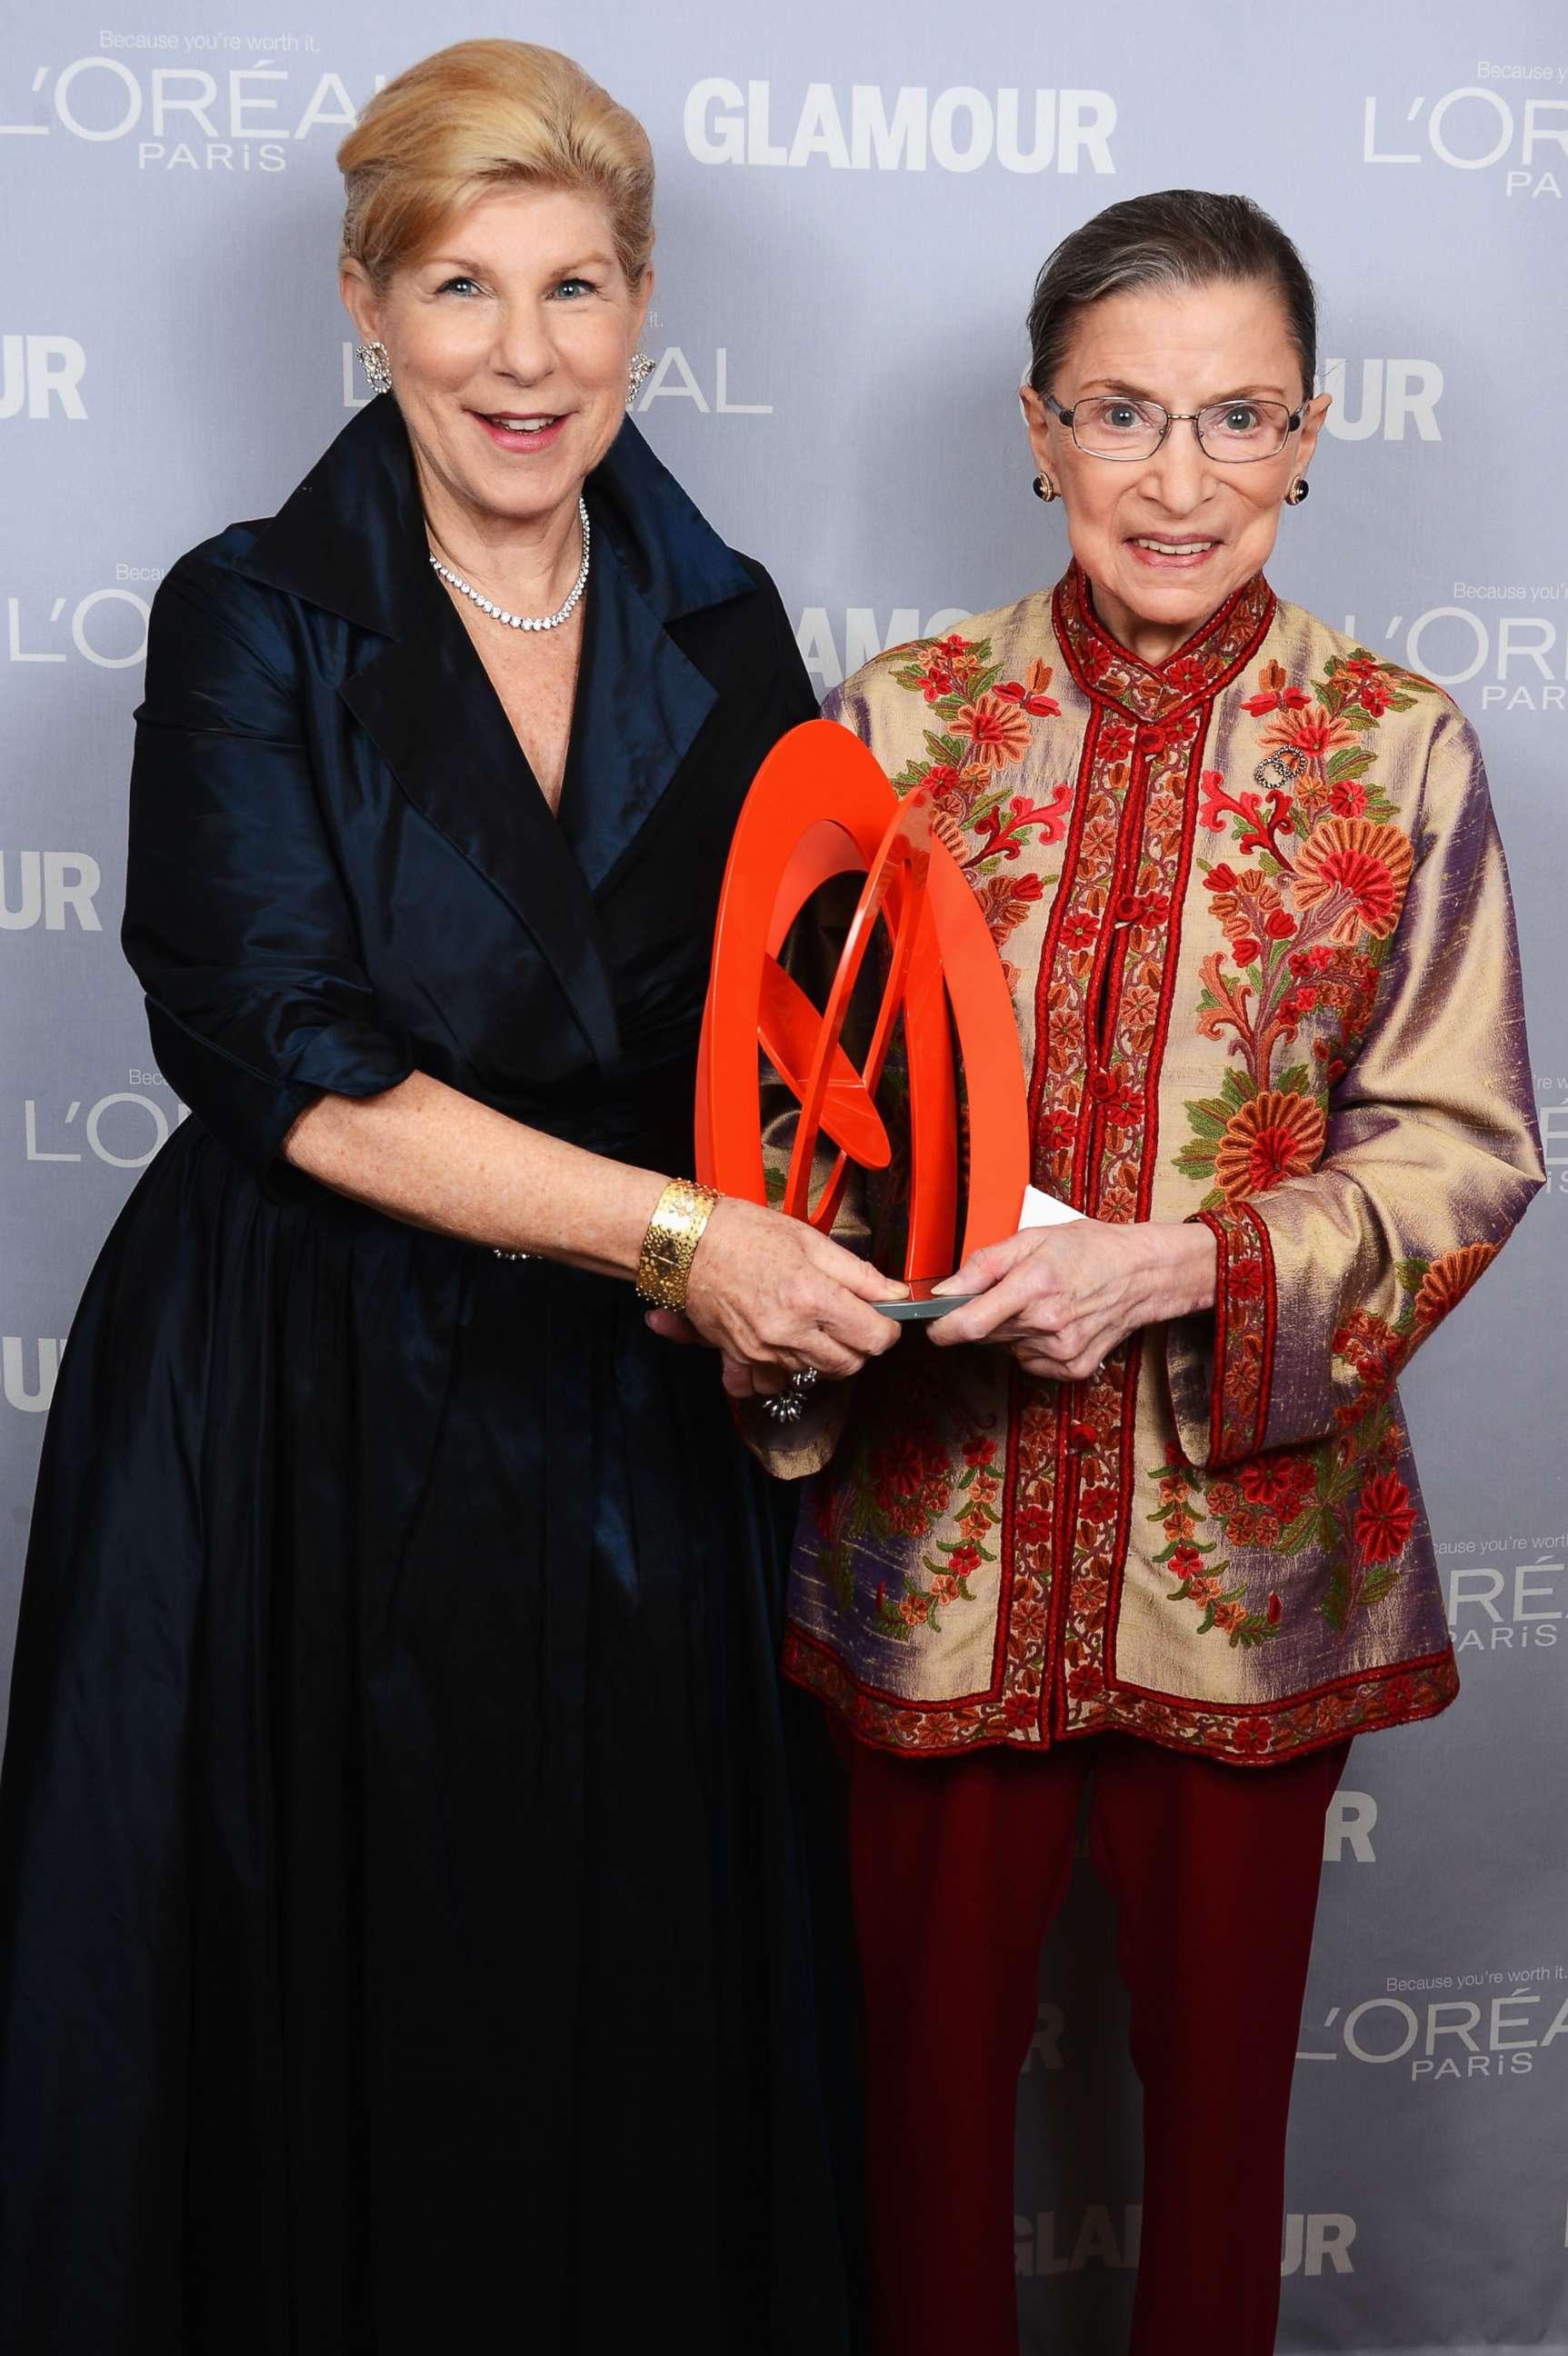 PHOTO: Nina Totenberg, left, and Justice Ruth Bader Ginsburg pose backstage at the 22nd annual Glamour Women of the Year Awards at Carnegie Hall, Nov. 12, 2012, in New York City.